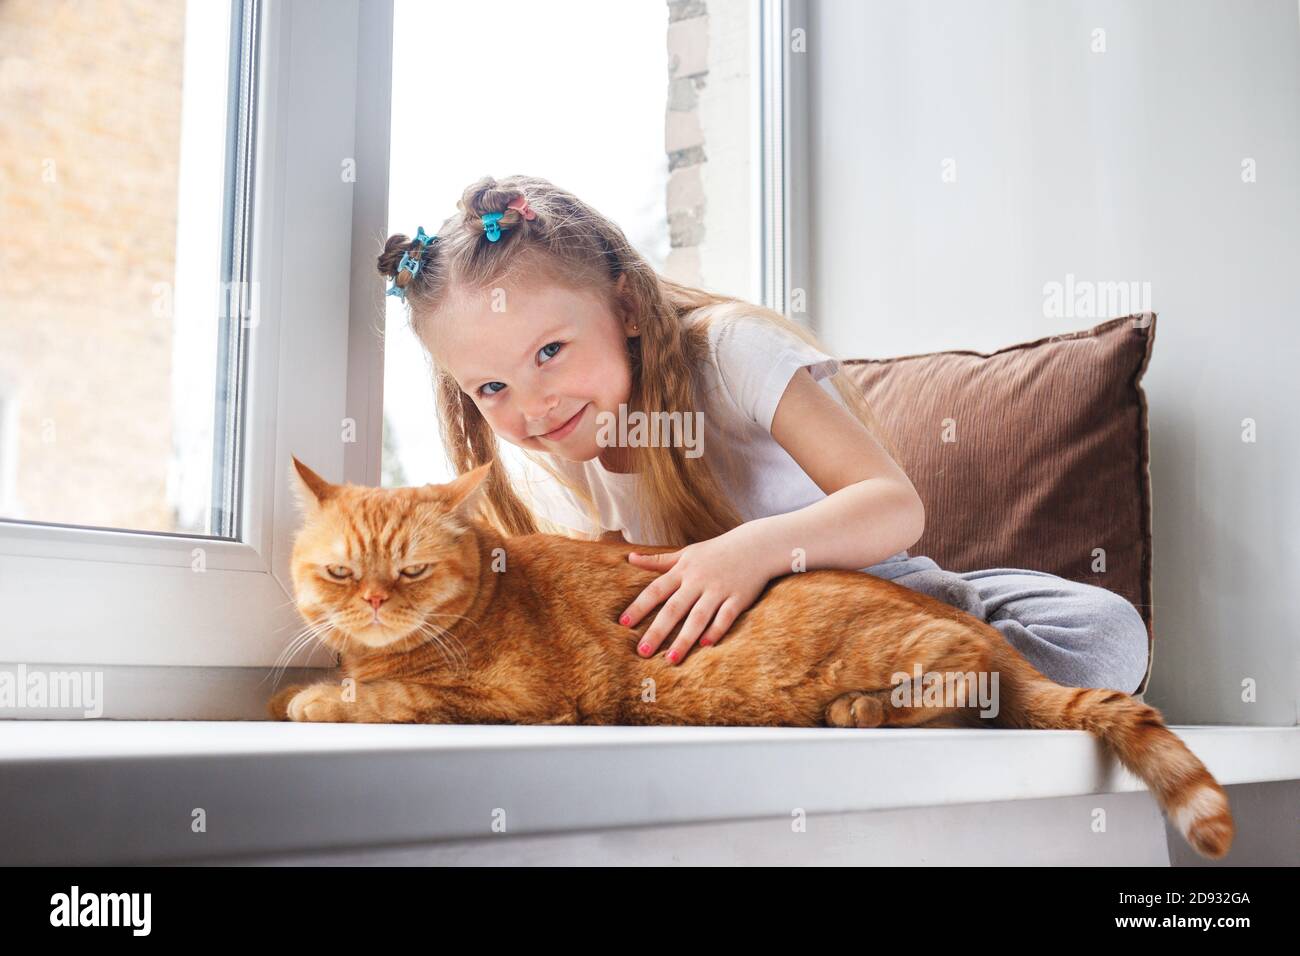 Cute child embraces with tenderness and love a red cat on window Stock Photo